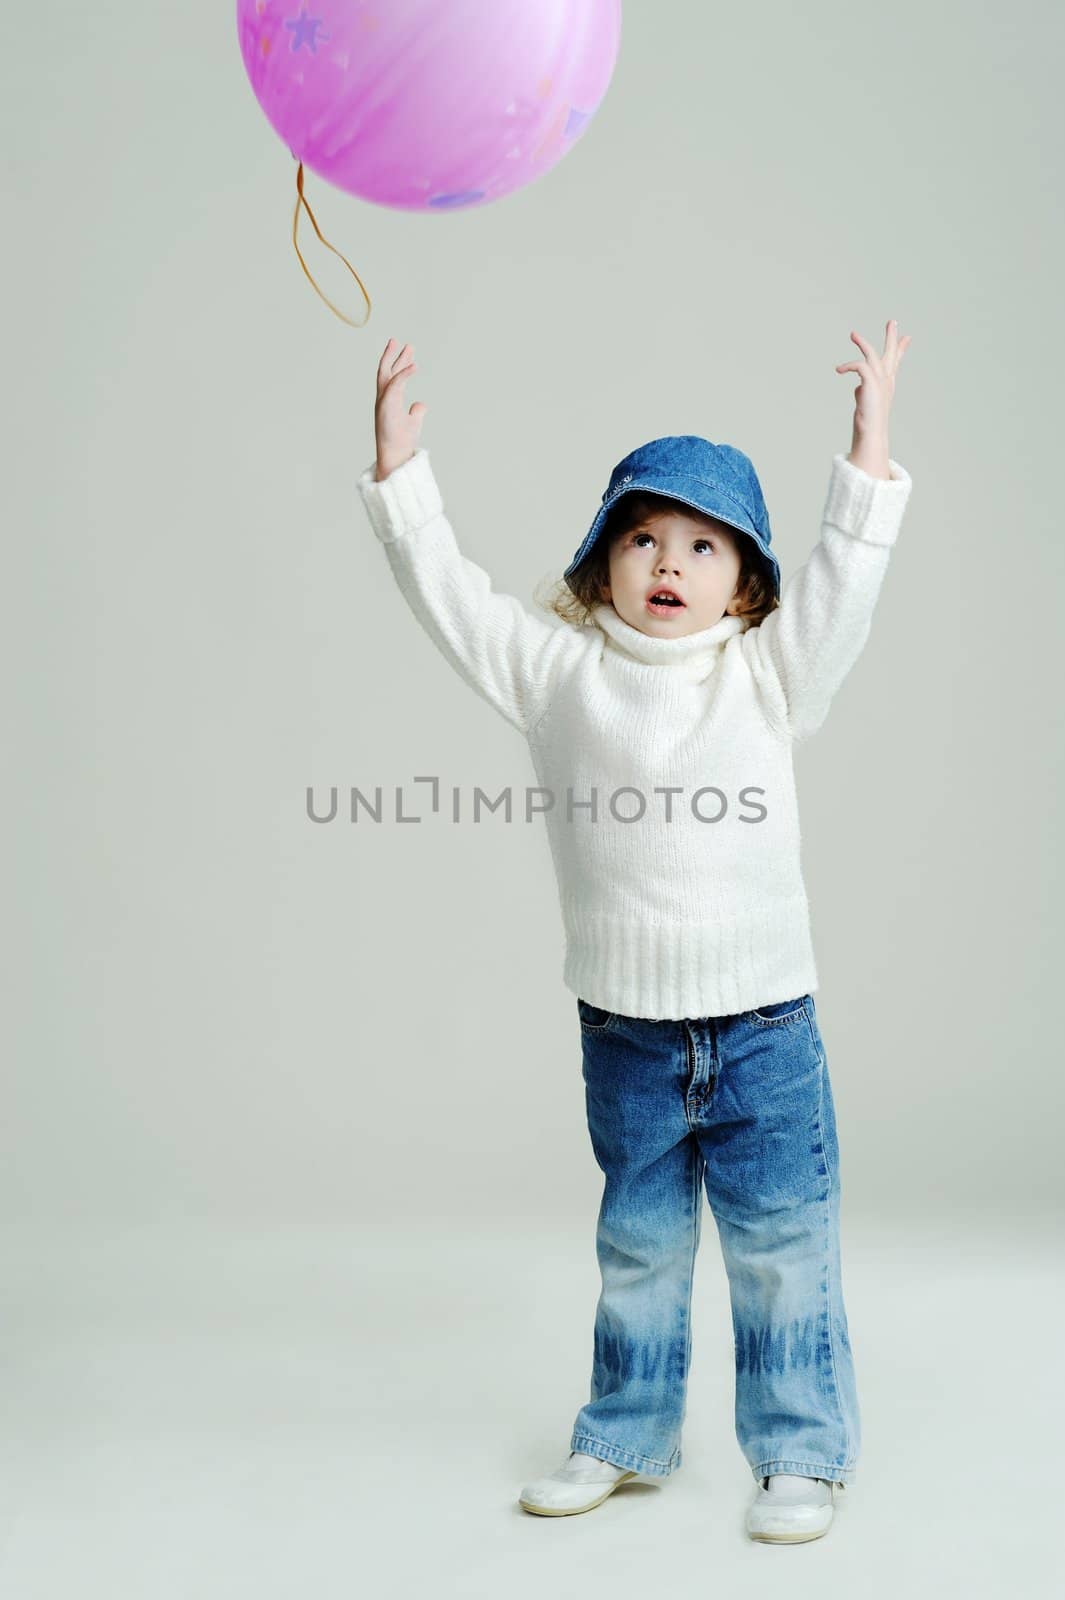 An image of a little girl in a hat and white jumper with balloon